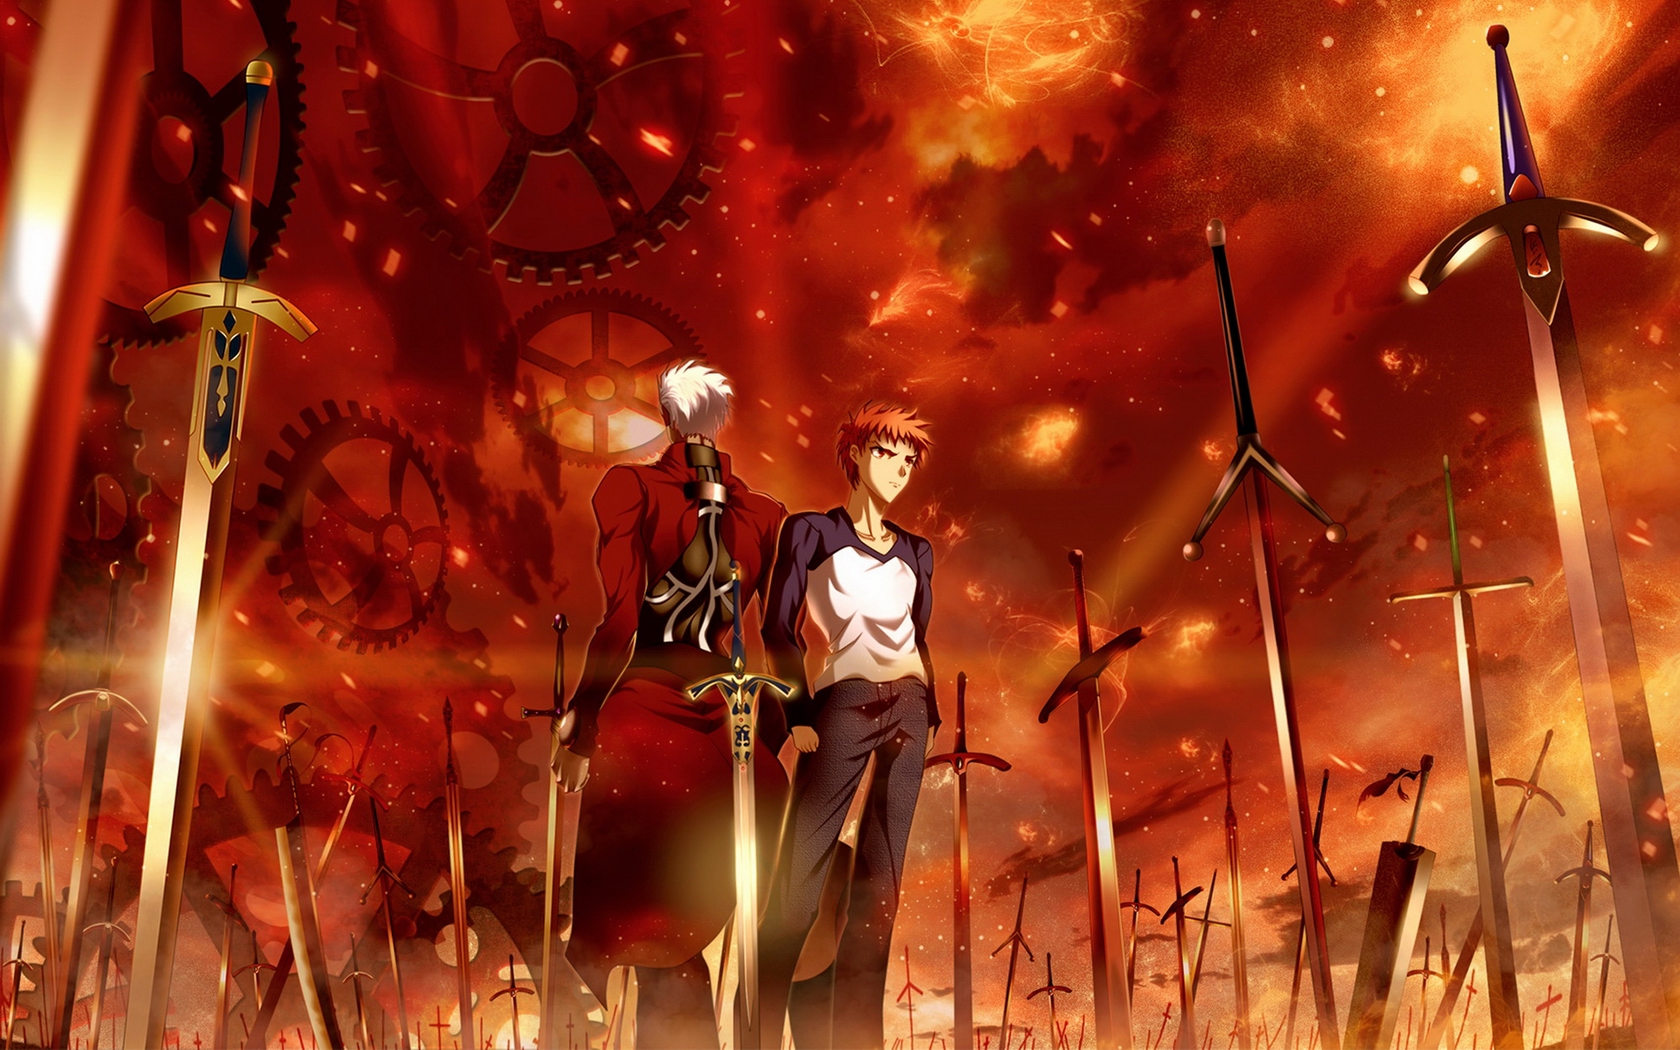 Anime 1680x1050 Fate series Fate/Stay Night Fate/Stay Night: Unlimited Blade Works anime boys anime sword